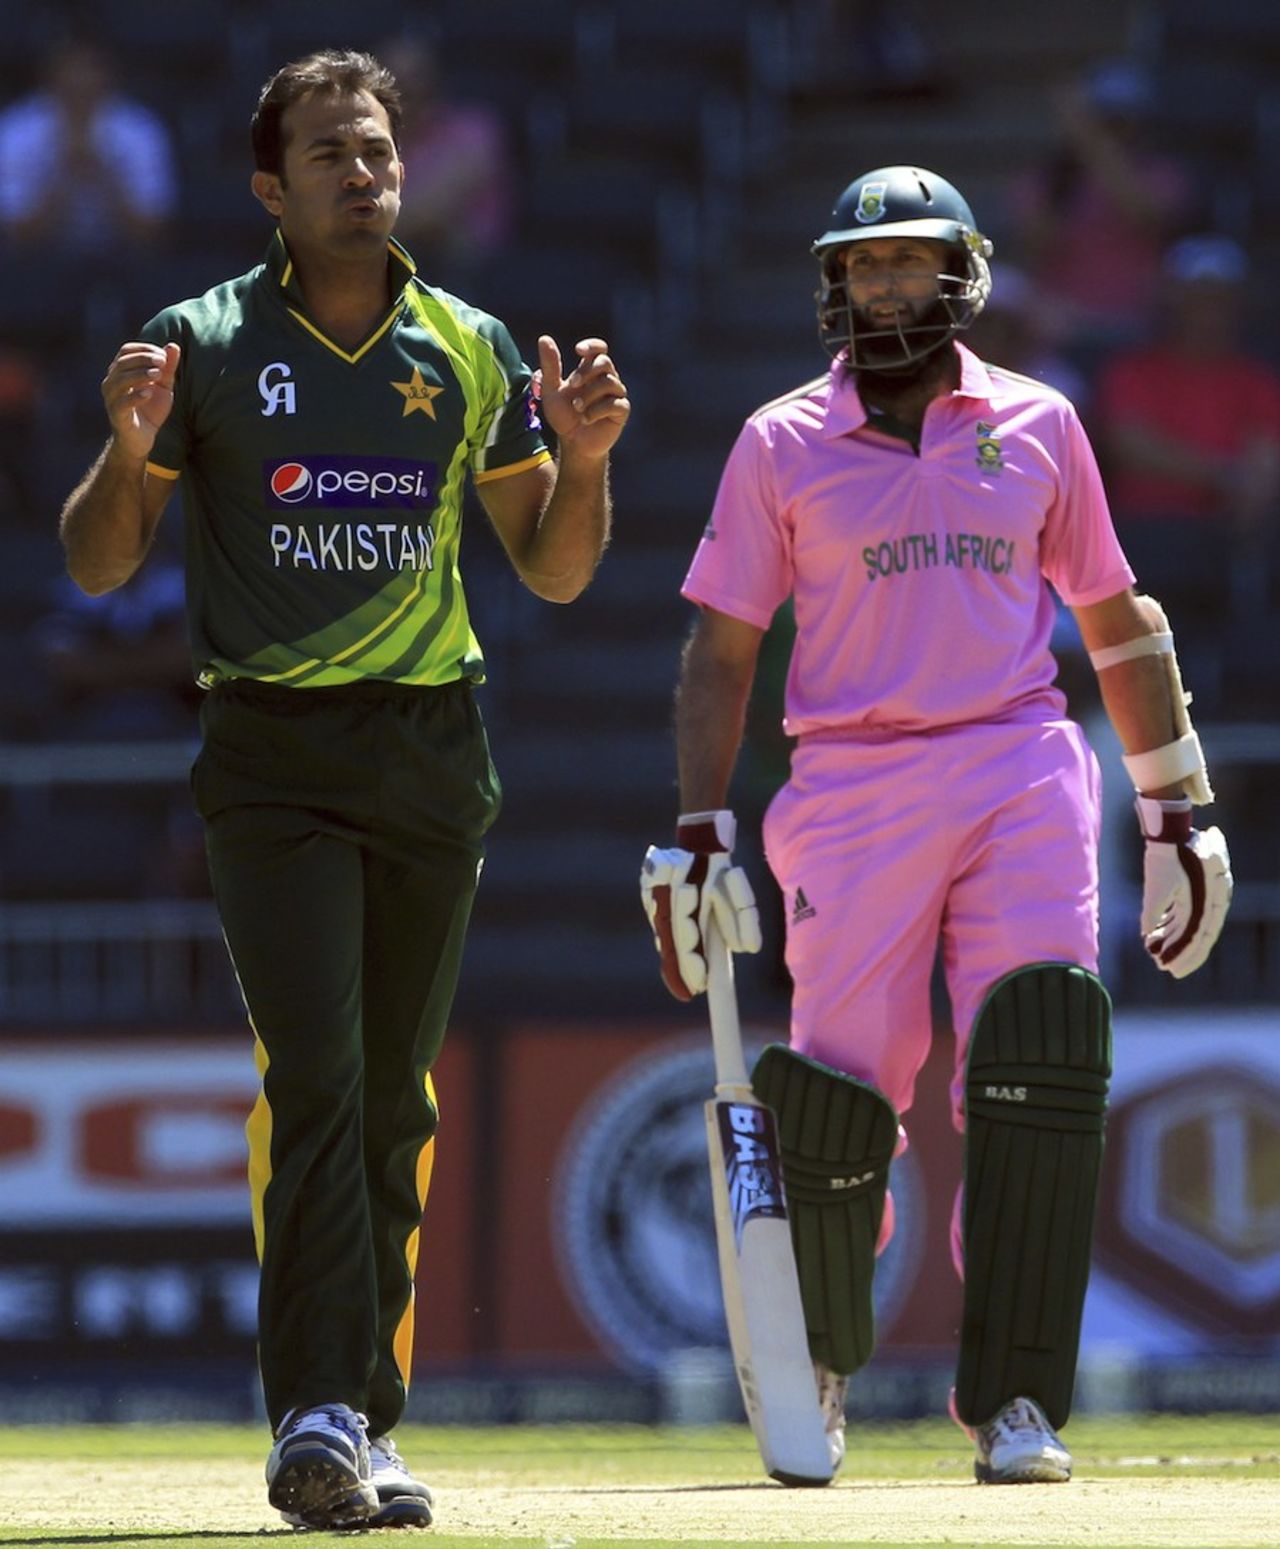 Wahab Riaz was expensive at the Wanderers, South Africa v Pakistan, 3rd ODI, Johannesburg, March 17, 2013